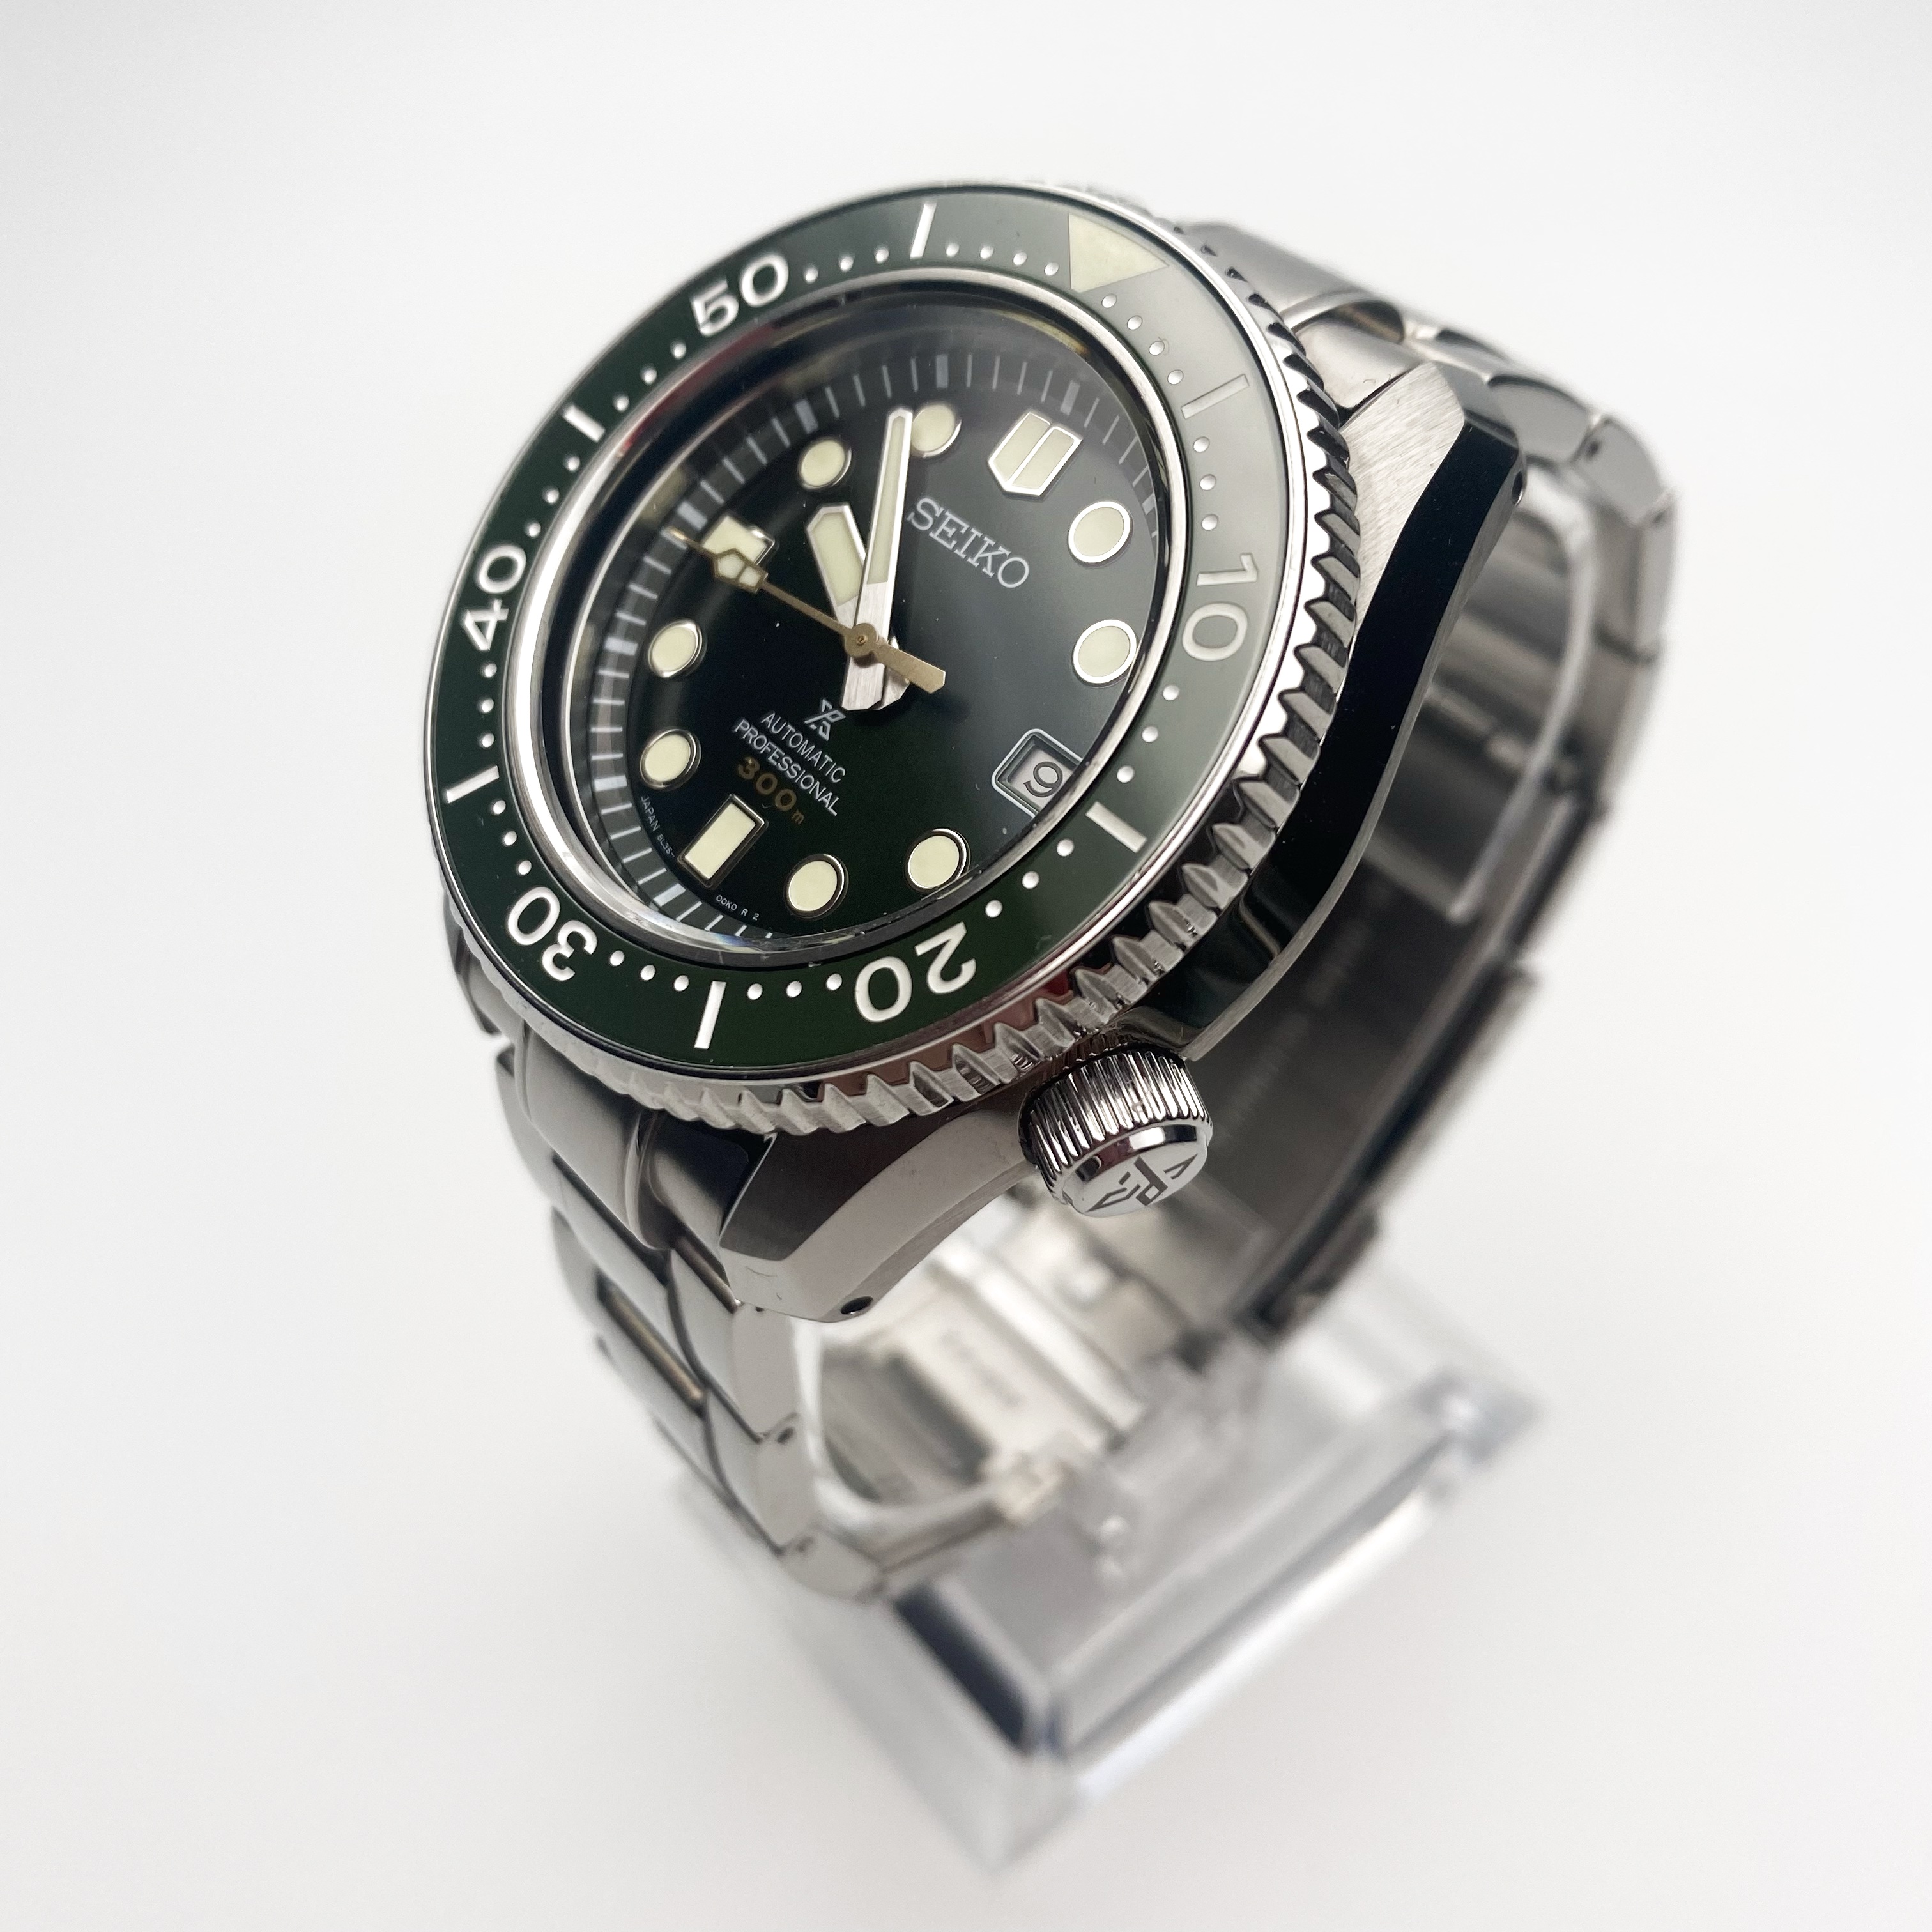 WTS] Seiko Prospex - SLA019 - Green Dial - MM300 - 50th Anniversary Limited  Edition | WatchCharts